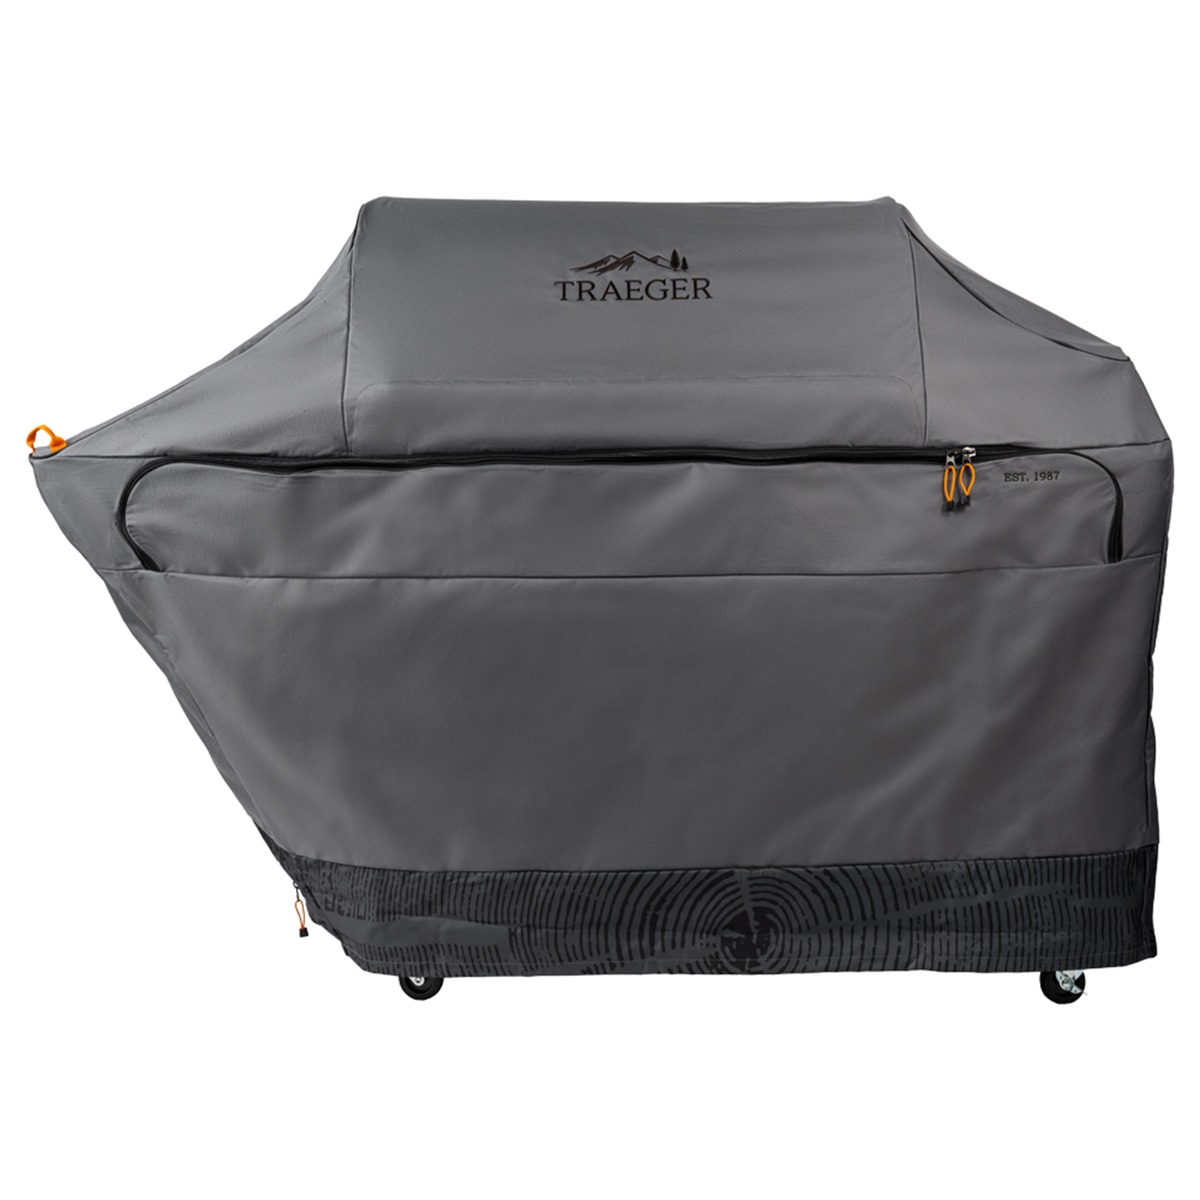 Full – Length Grill Cover, for Timberline XL INT – Traeger®